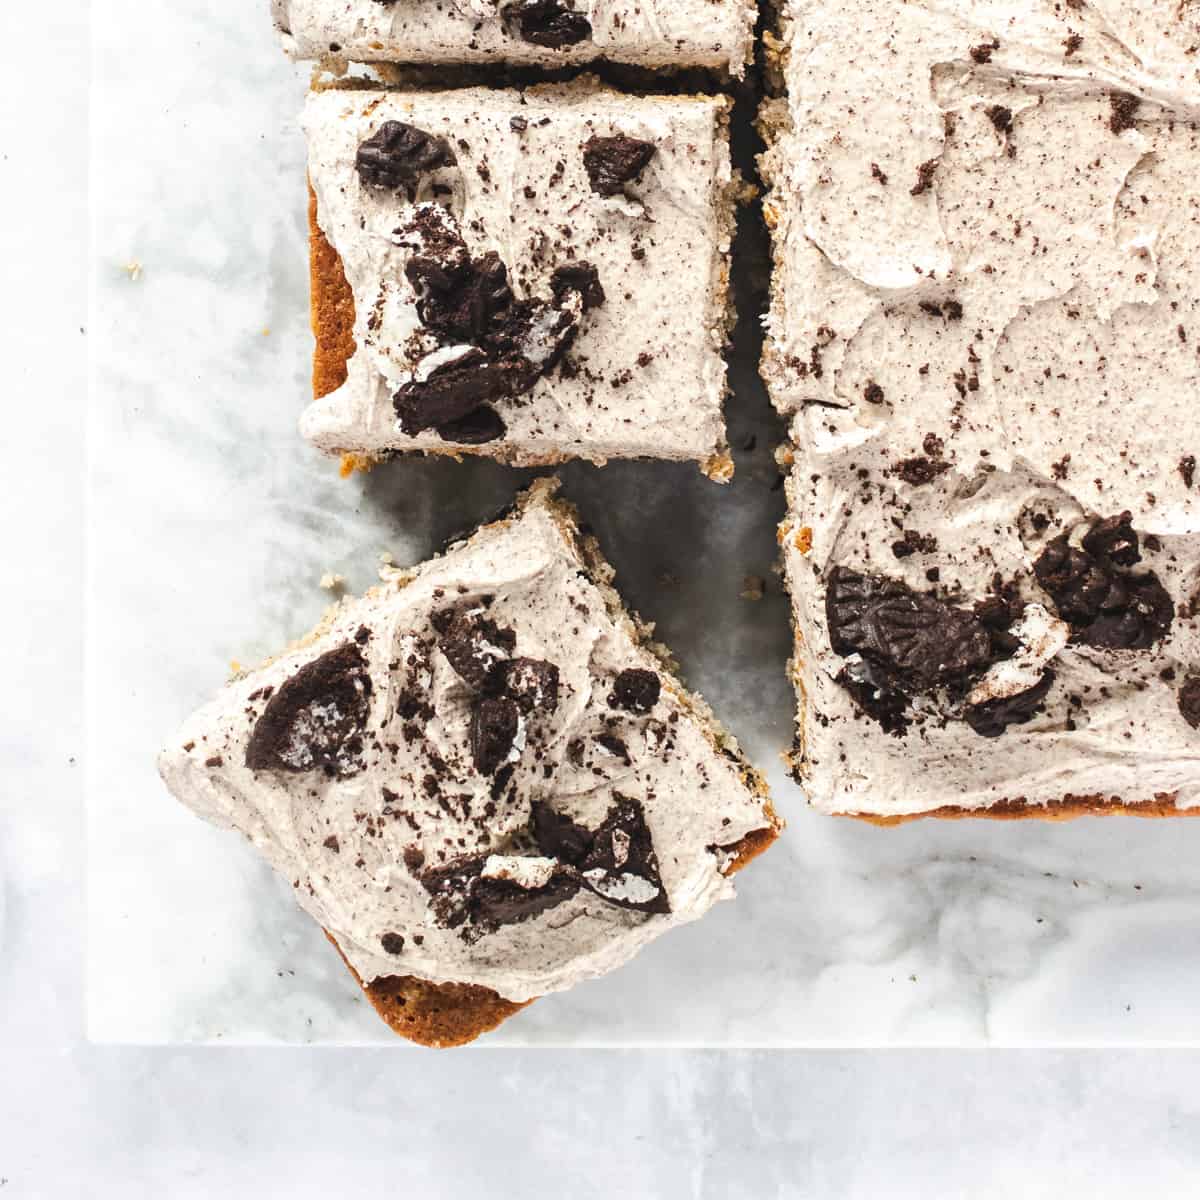 Oreo sheet cake on a marble pastry board cut into square pieces